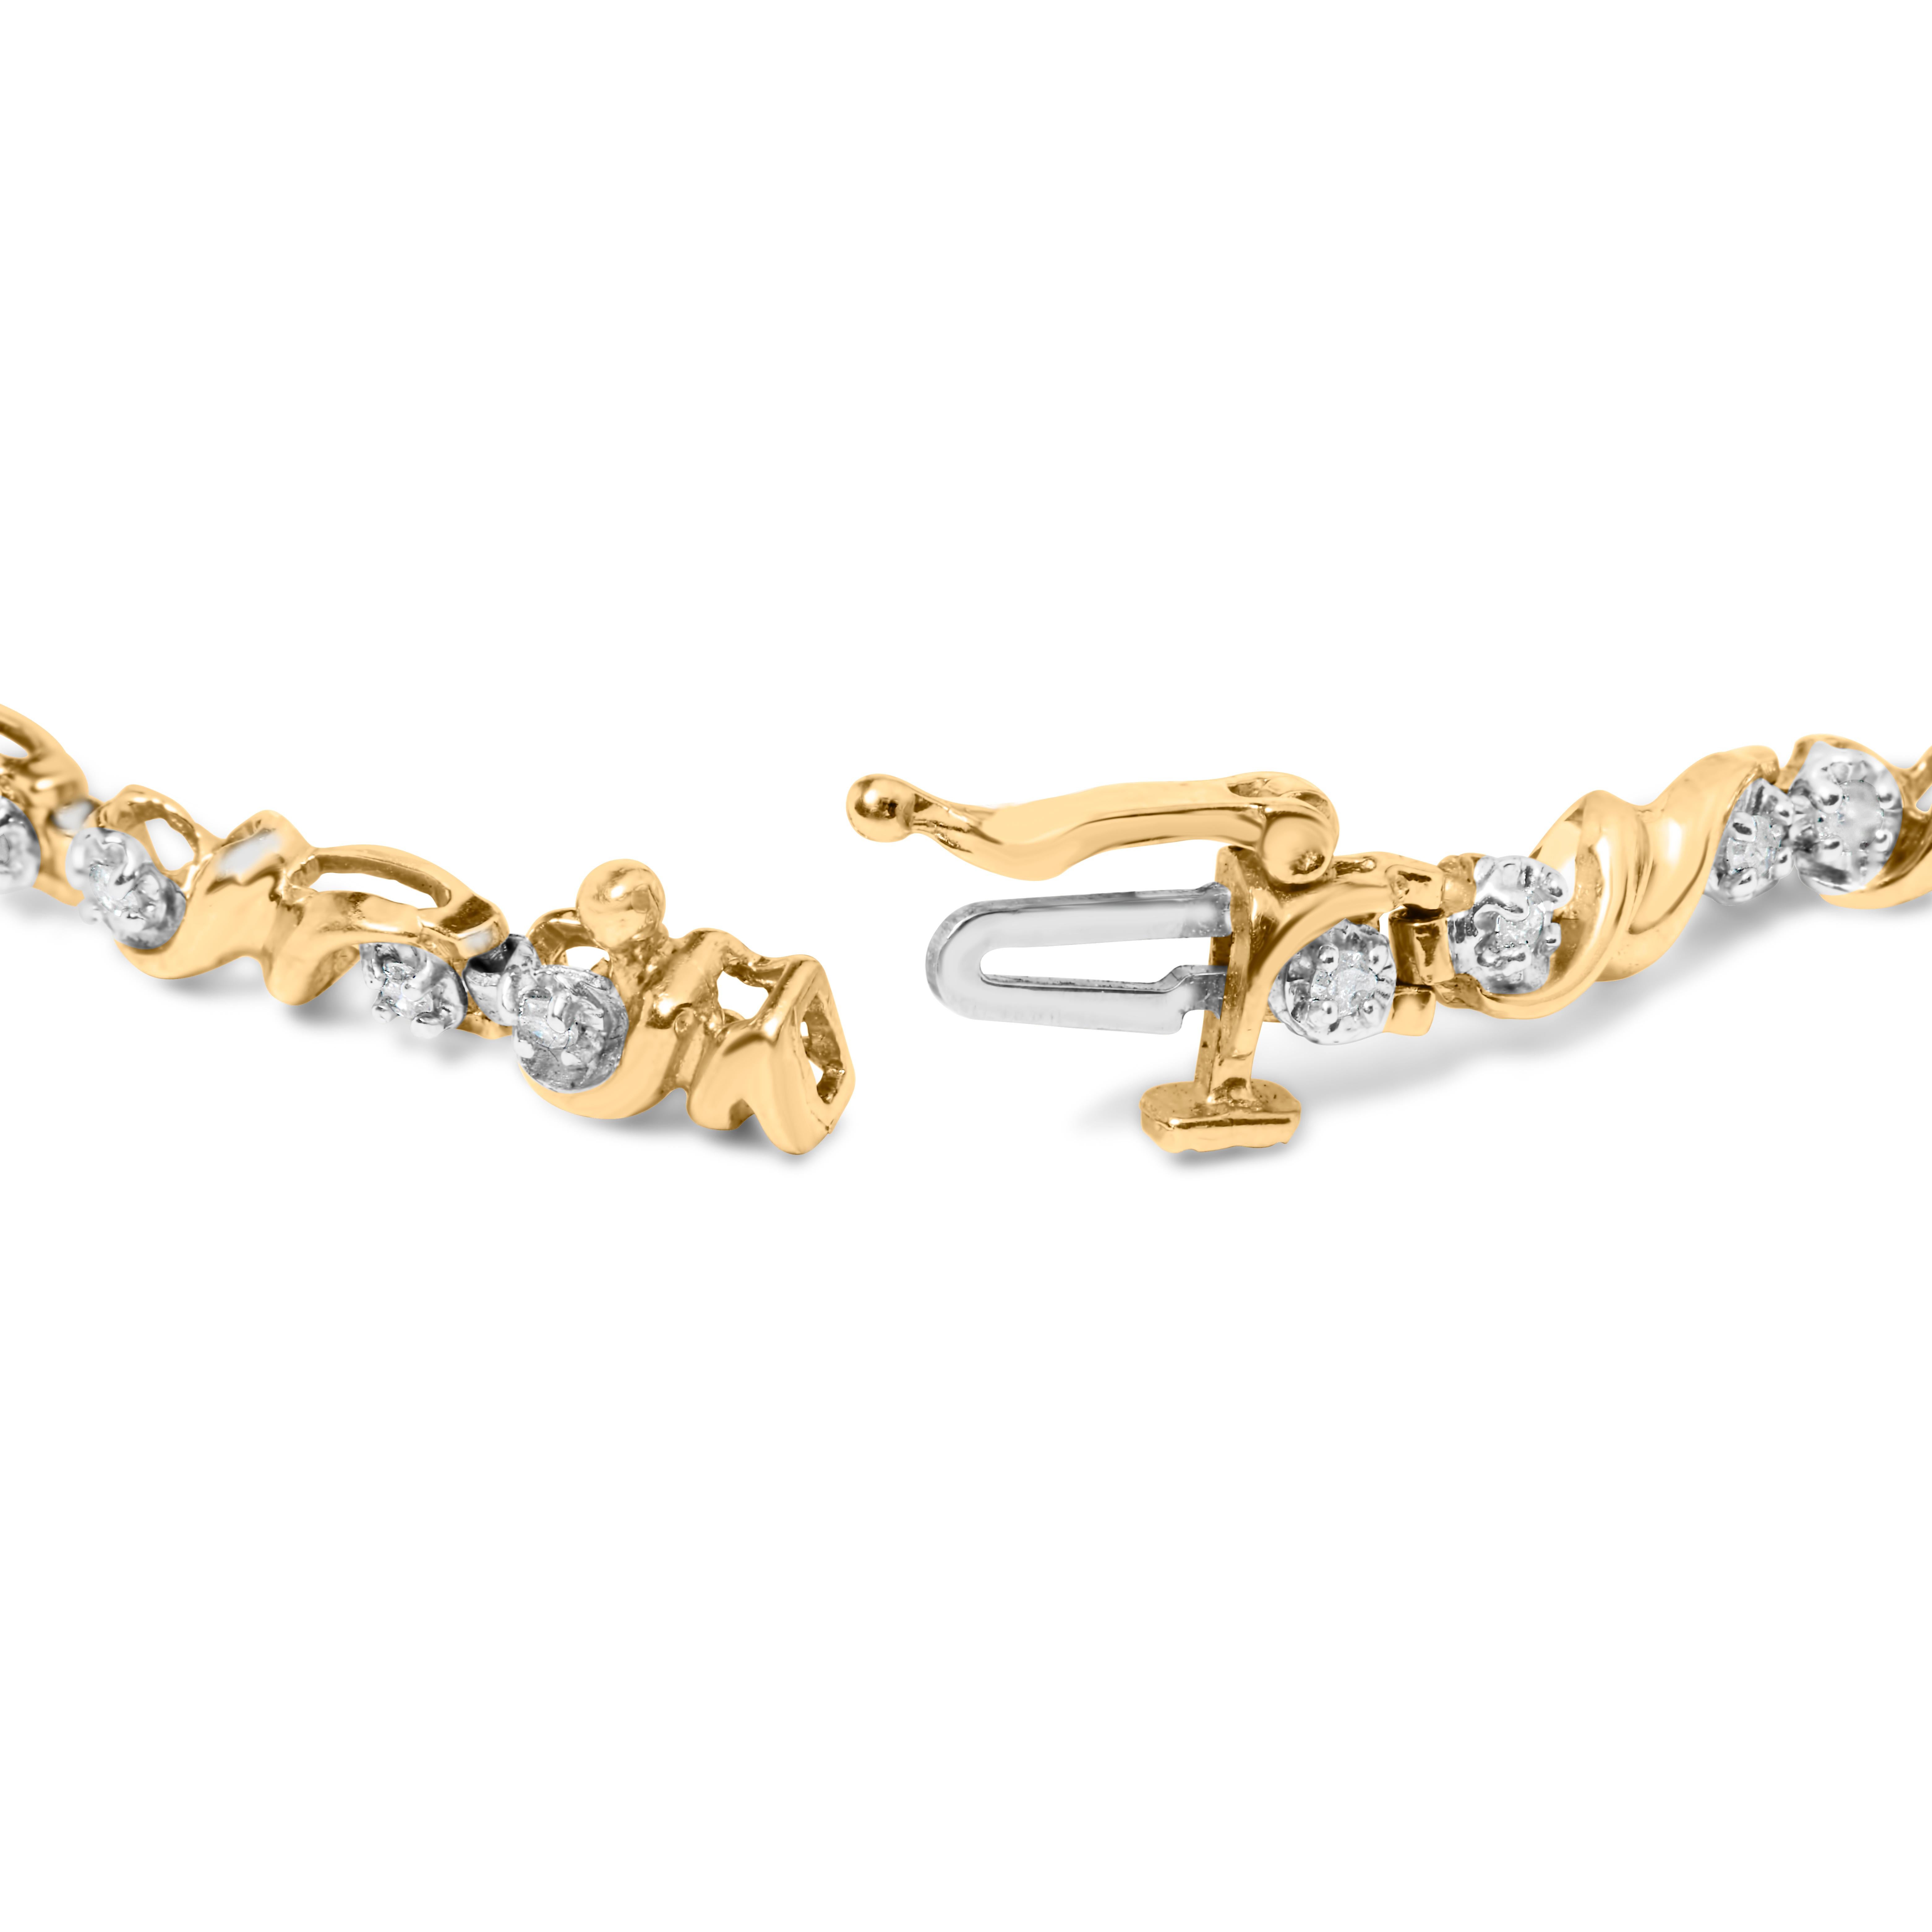 This gorgeous .925 sterling silver tennis bracelet features 0.5 carat total weight with 20 rose-cut diamonds. The diamonds are promo quality, which are milky and cloudy in nature. The unique miracle-plate setting centers each diamond in a